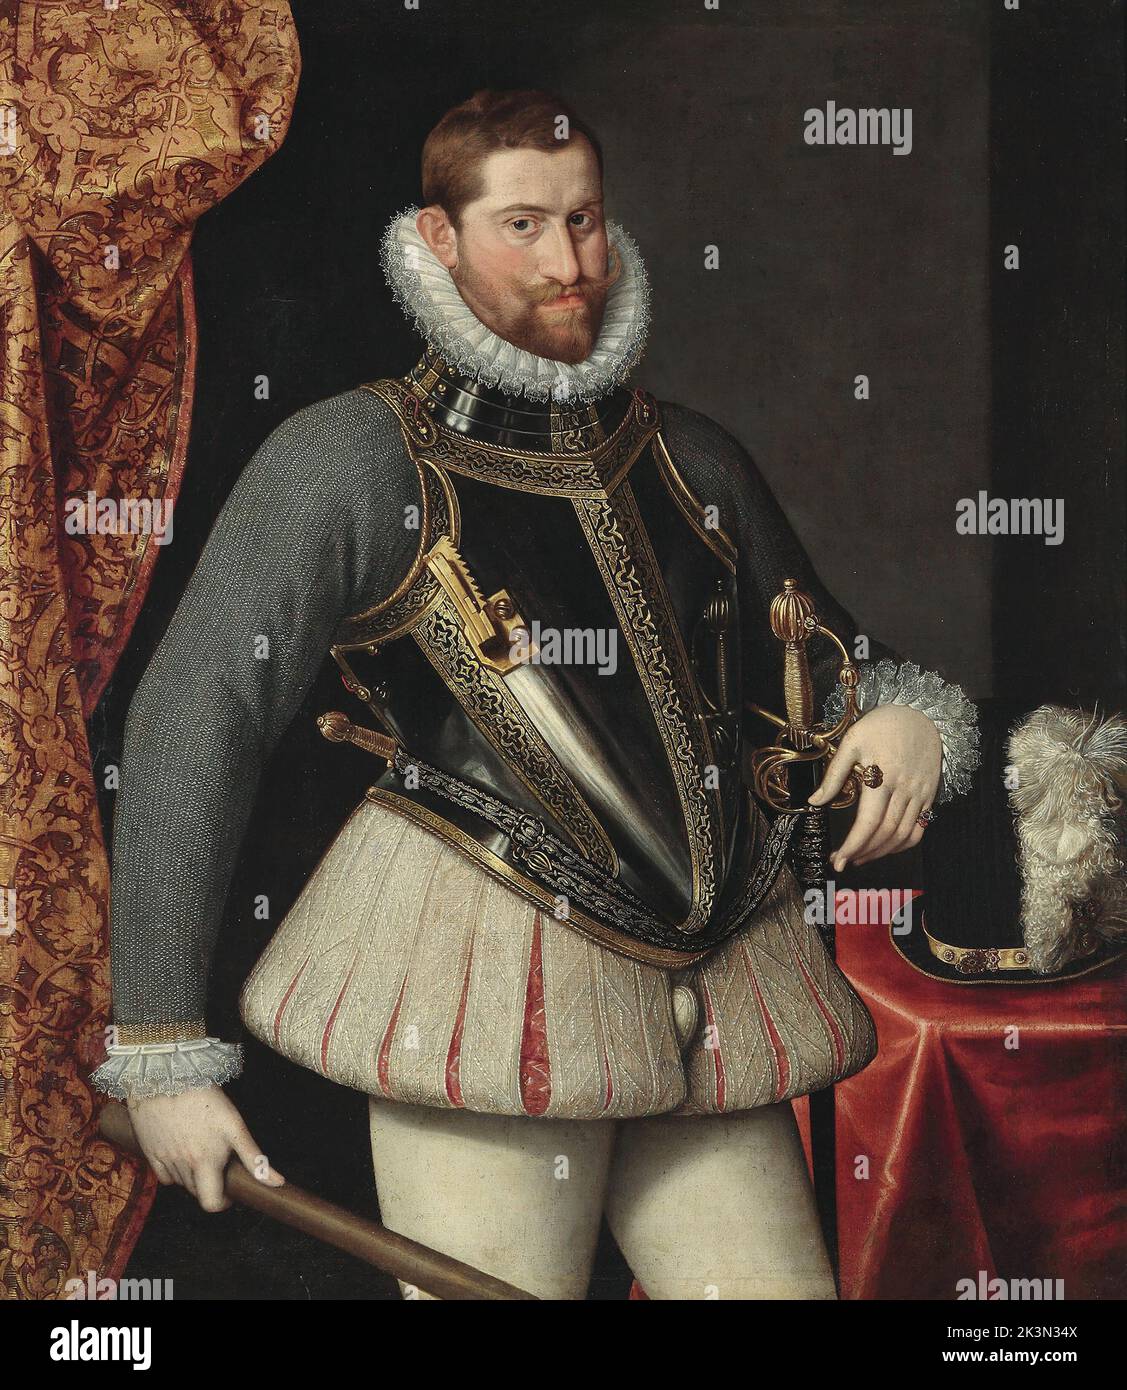 Portrait of Rudolf II by Martino Rota Rudolf II (18 July 1552 – 20 January 1612) was Holy Roman Emperor (1576–1612), King of Hungary and Croatia (as Rudolf I, 1572–1608), King of Bohemia (1575–1608/1611) and Archduke of Austria (1576–1608). He was a member of the House of Habsburg. Stock Photo